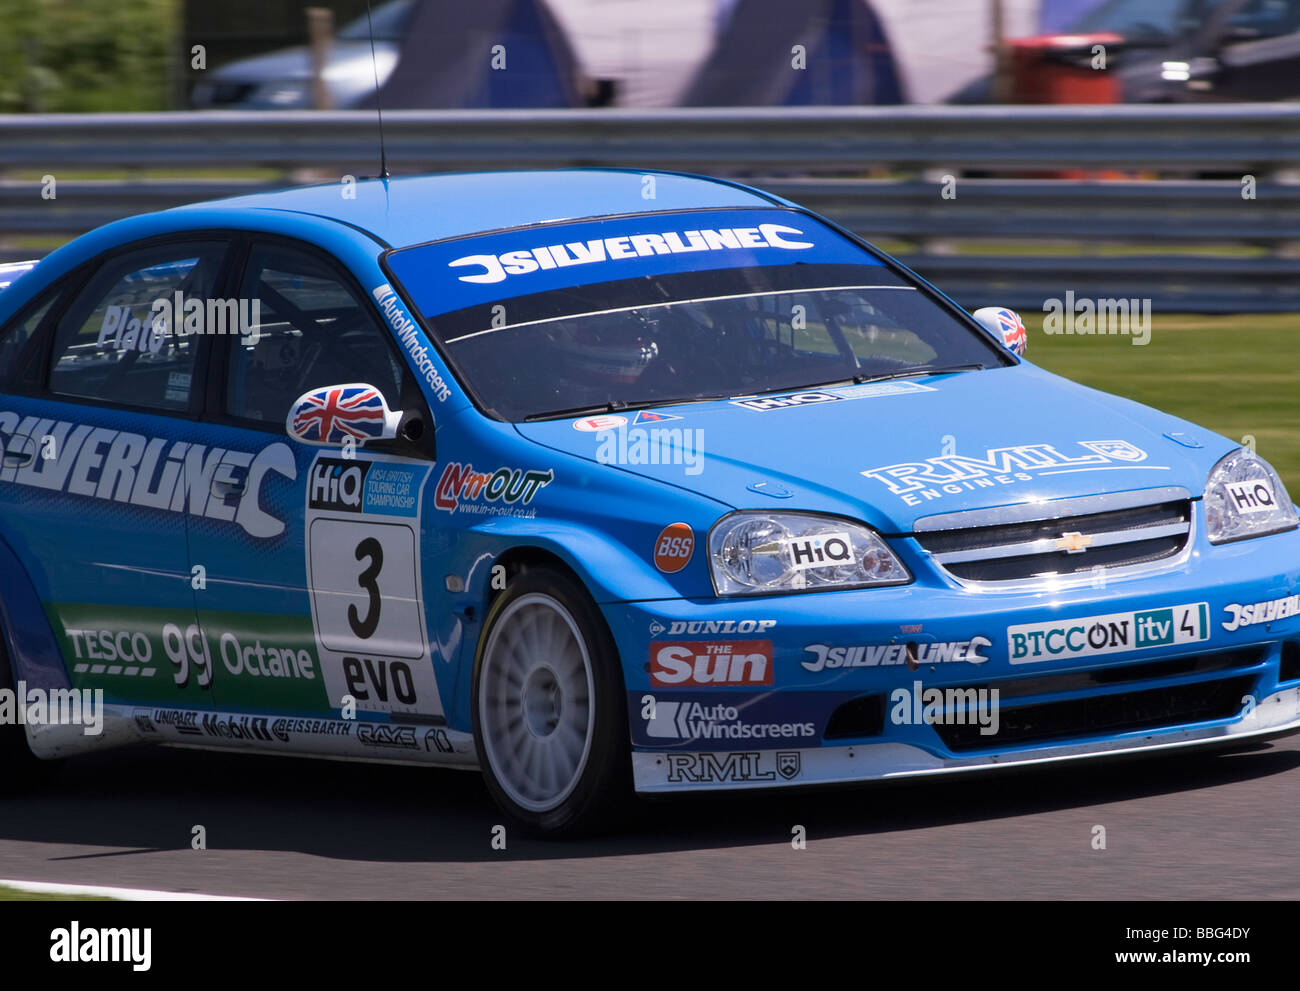 Pale Blue Racing Silverline Chevrolet Lacetti Race Car in British Touring  Car Championship at Oulton Park Cheshire England Stock Photo - Alamy